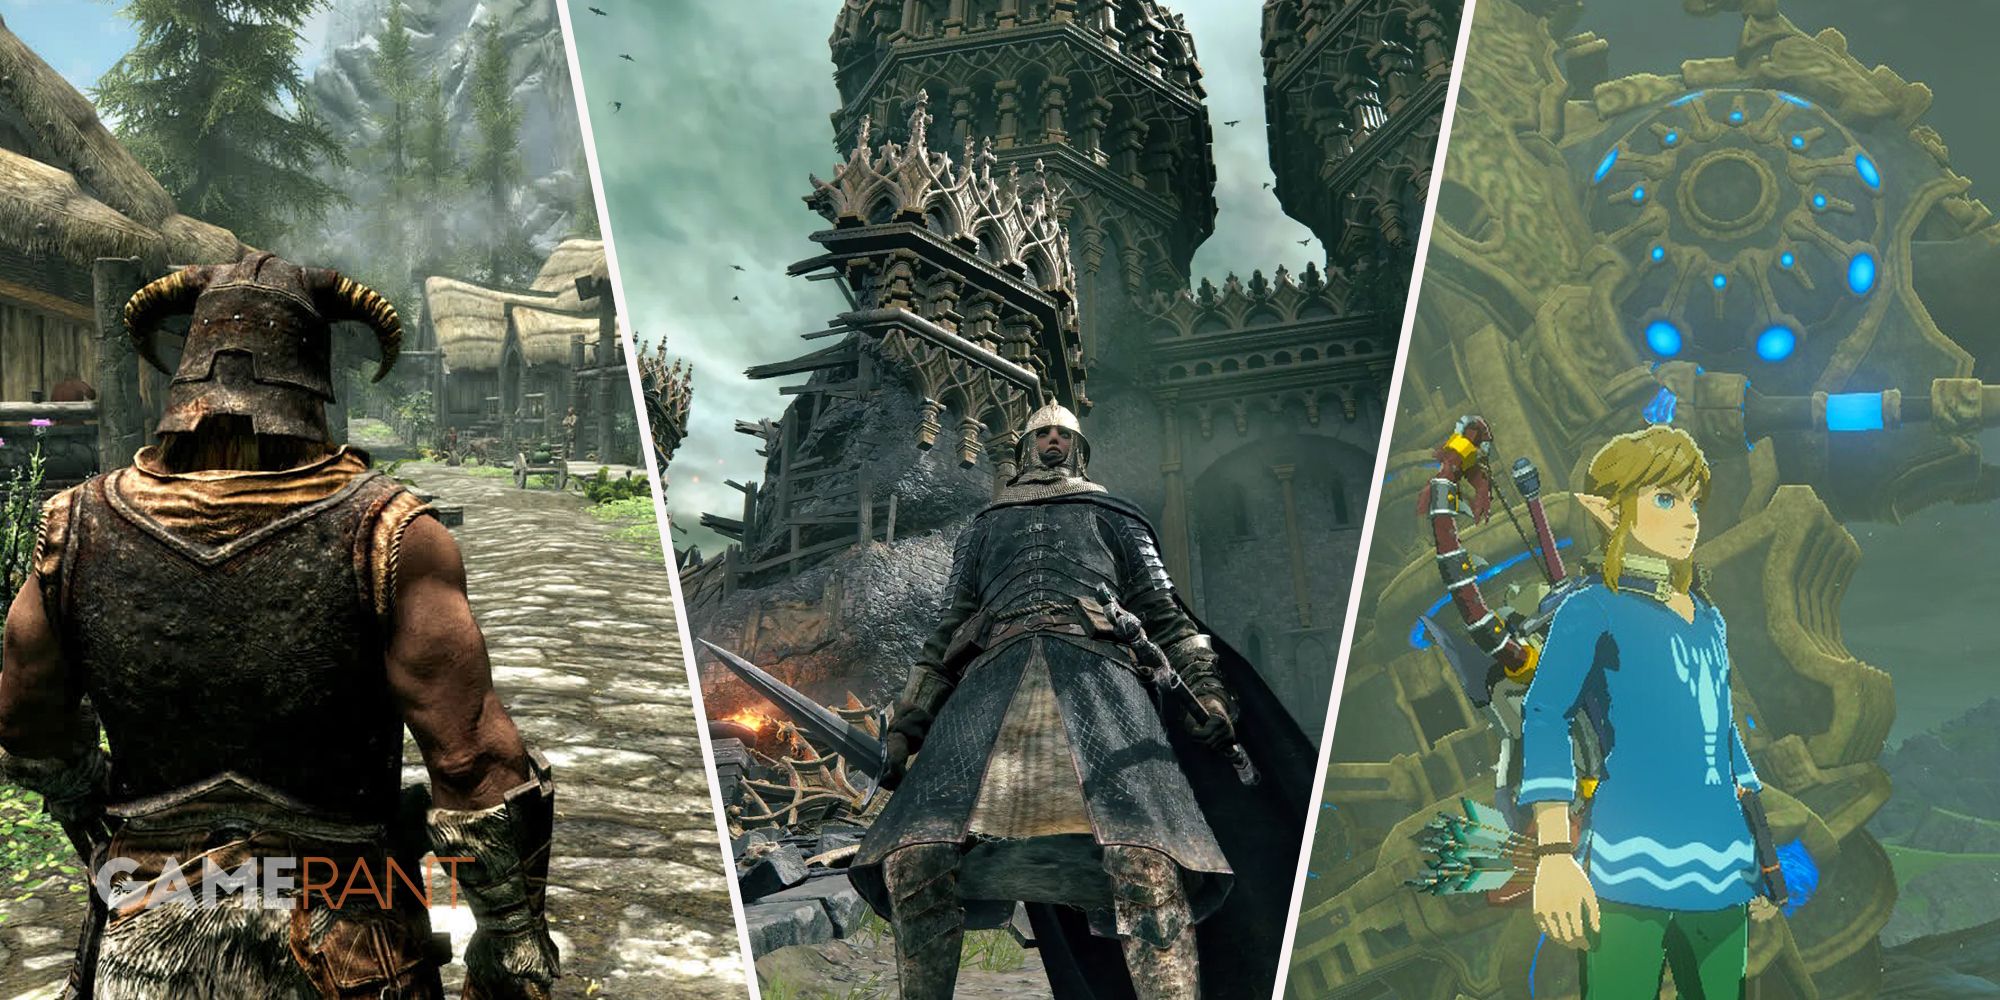 The Elder Scrolls 5: Skyrim Dovahkiin player on left, Elden Ring player in front of a castle in middle, Link from The Legend Of Zelda: Breath Of The Wild on right